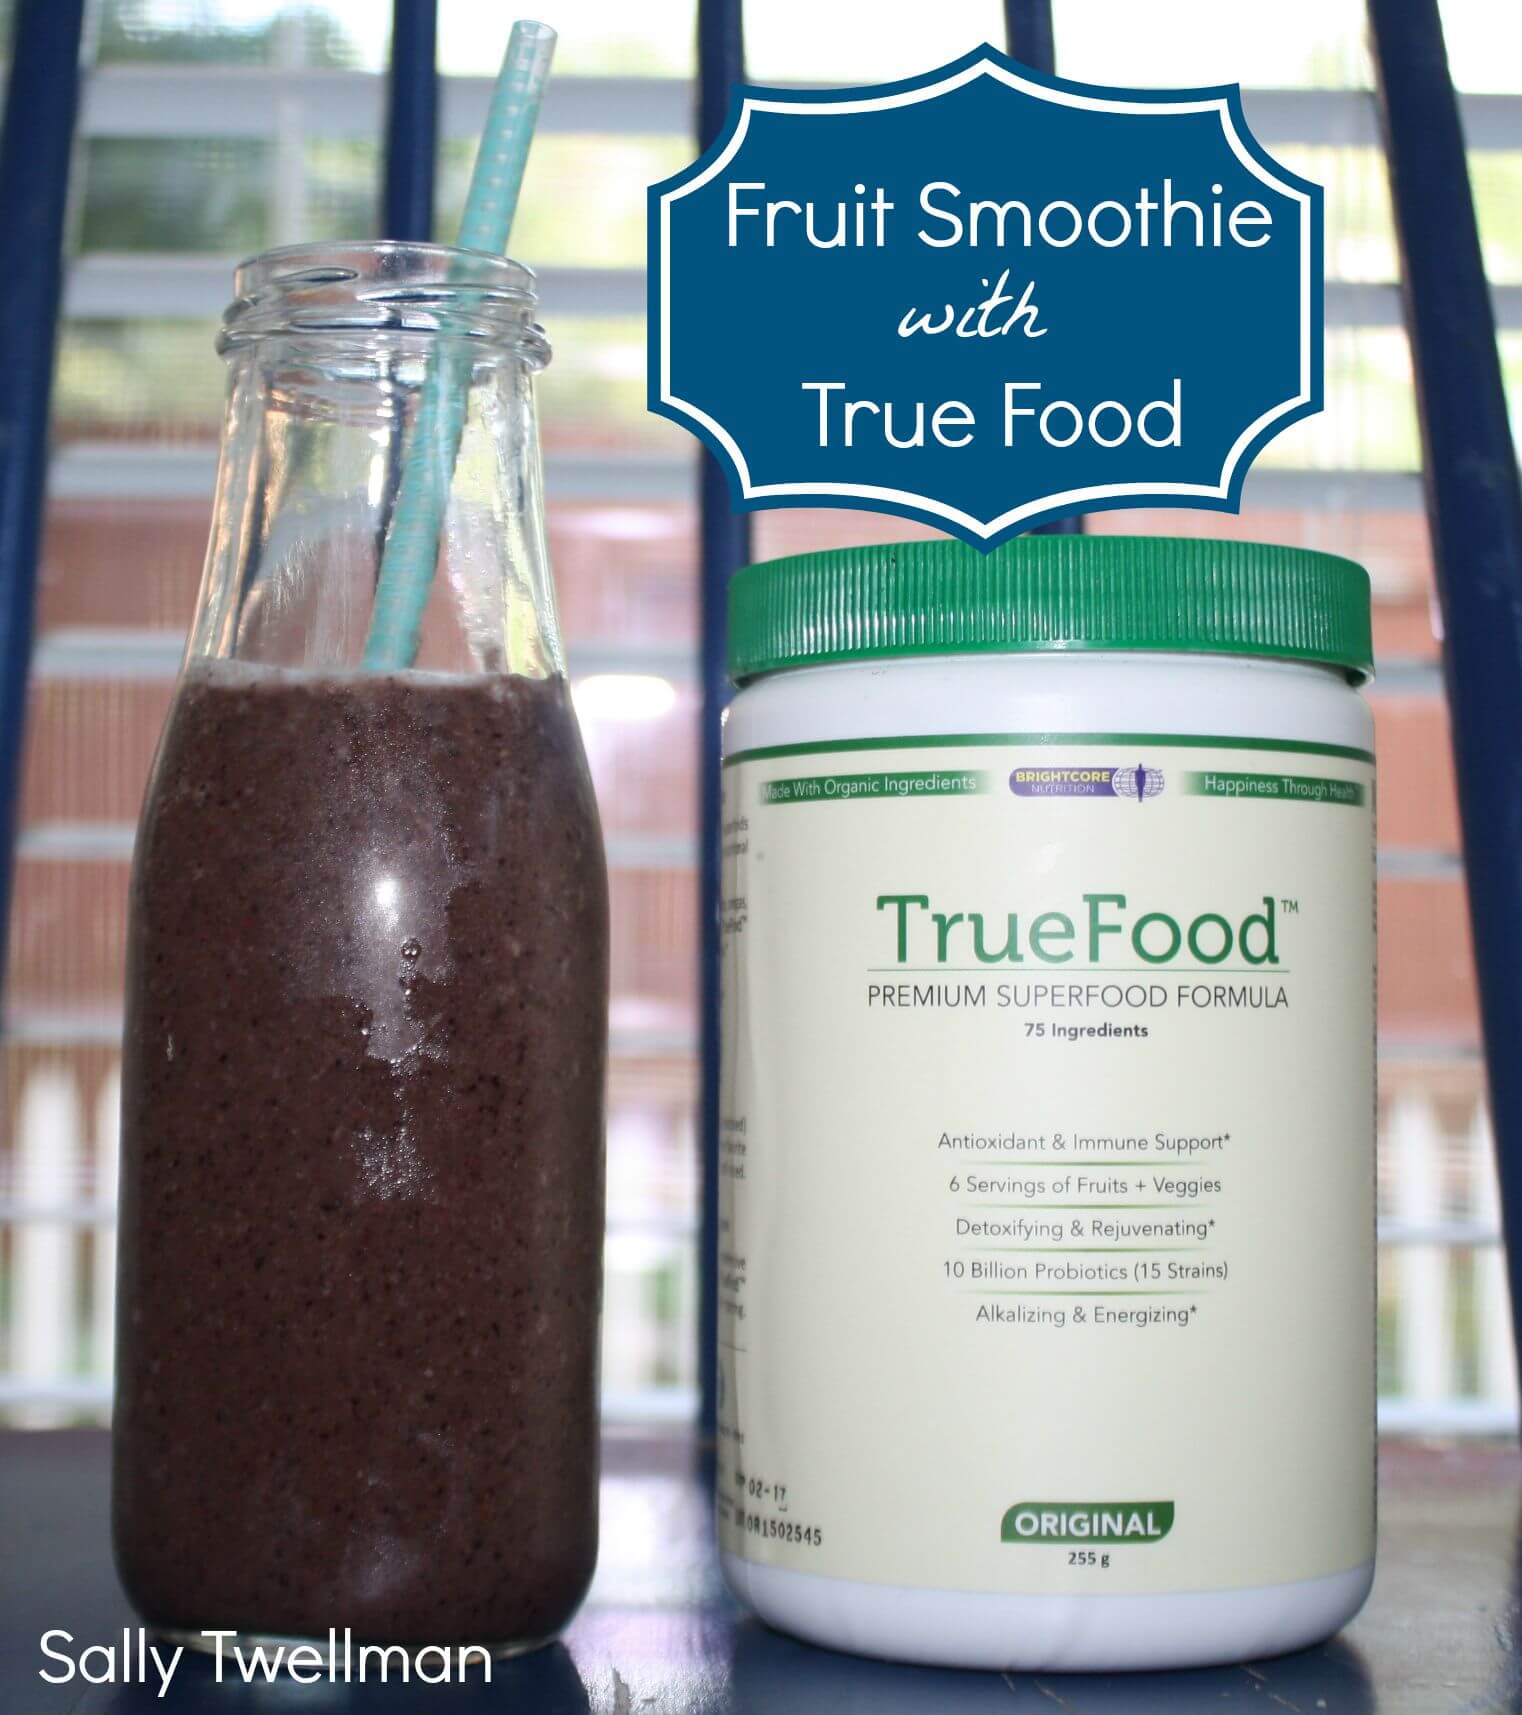 Fruit smoothie with True Food